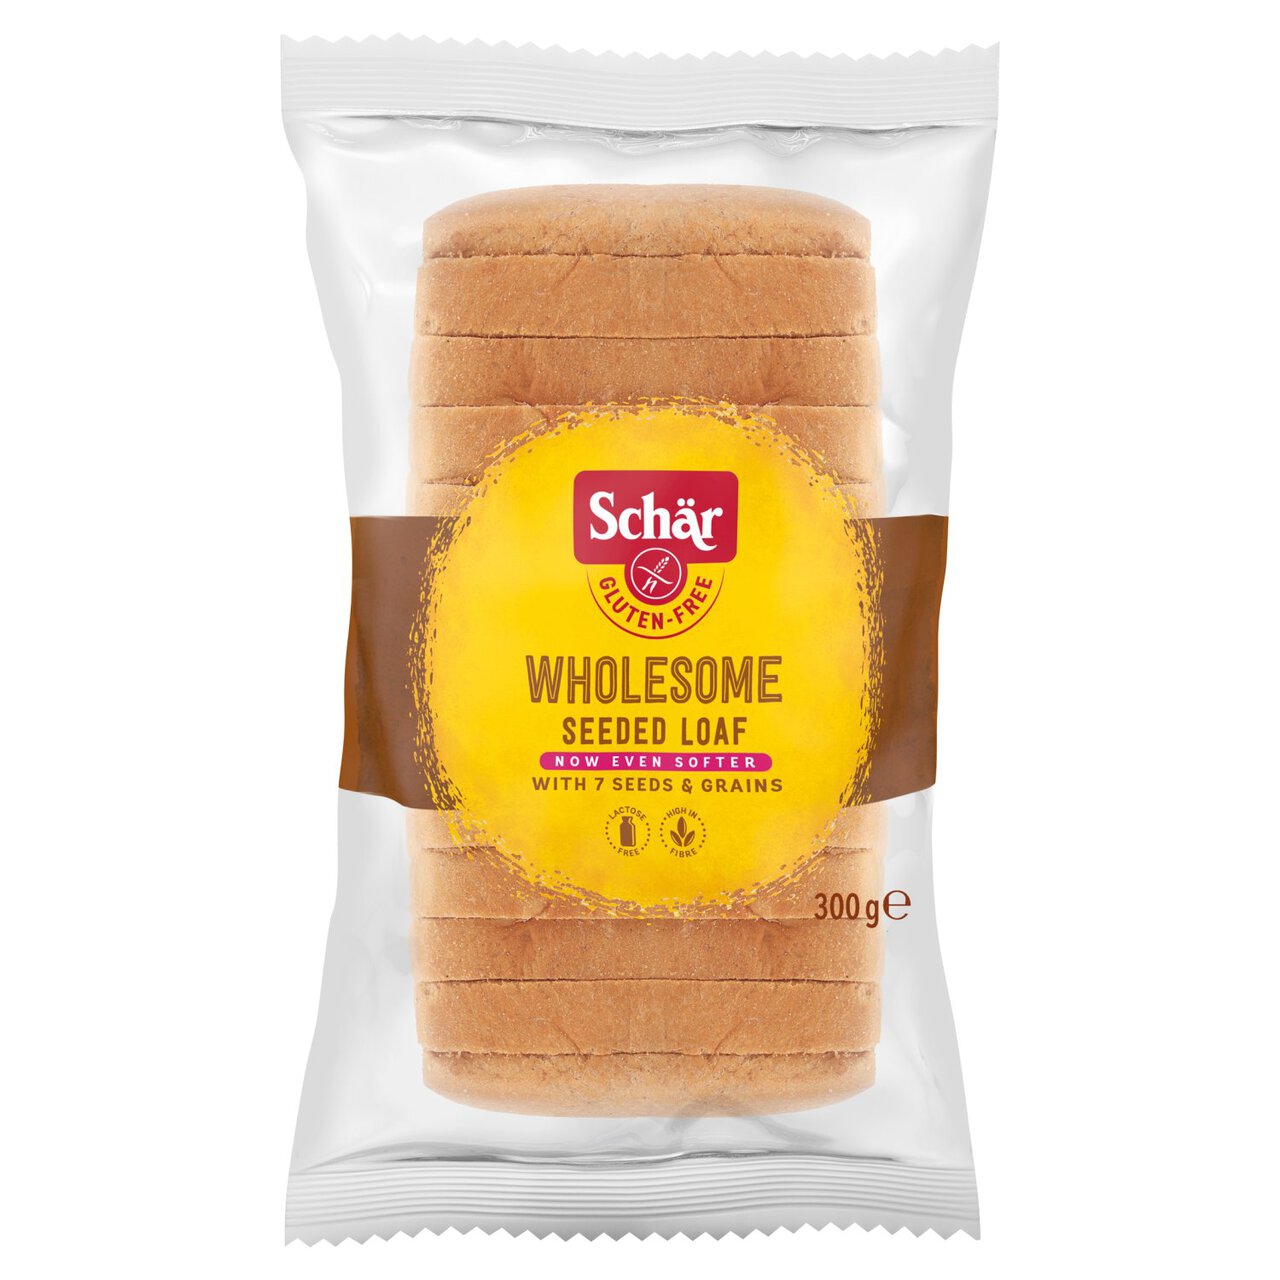 Schar Gluten Free Wholesome Seeded Loaf 300g